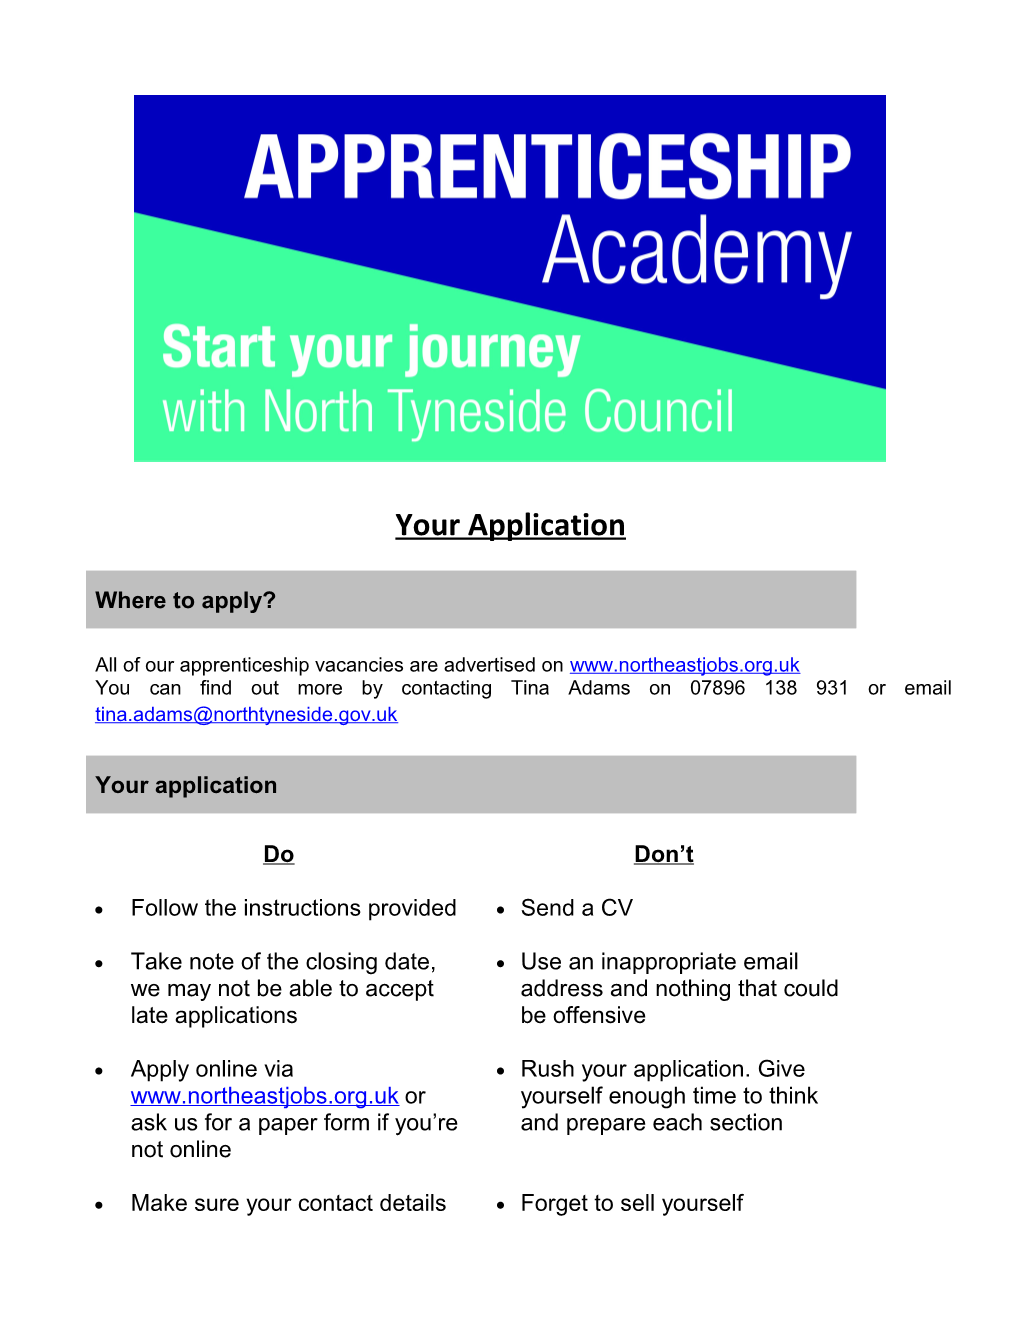 All of Our Apprenticeship Vacancies Are Advertised On